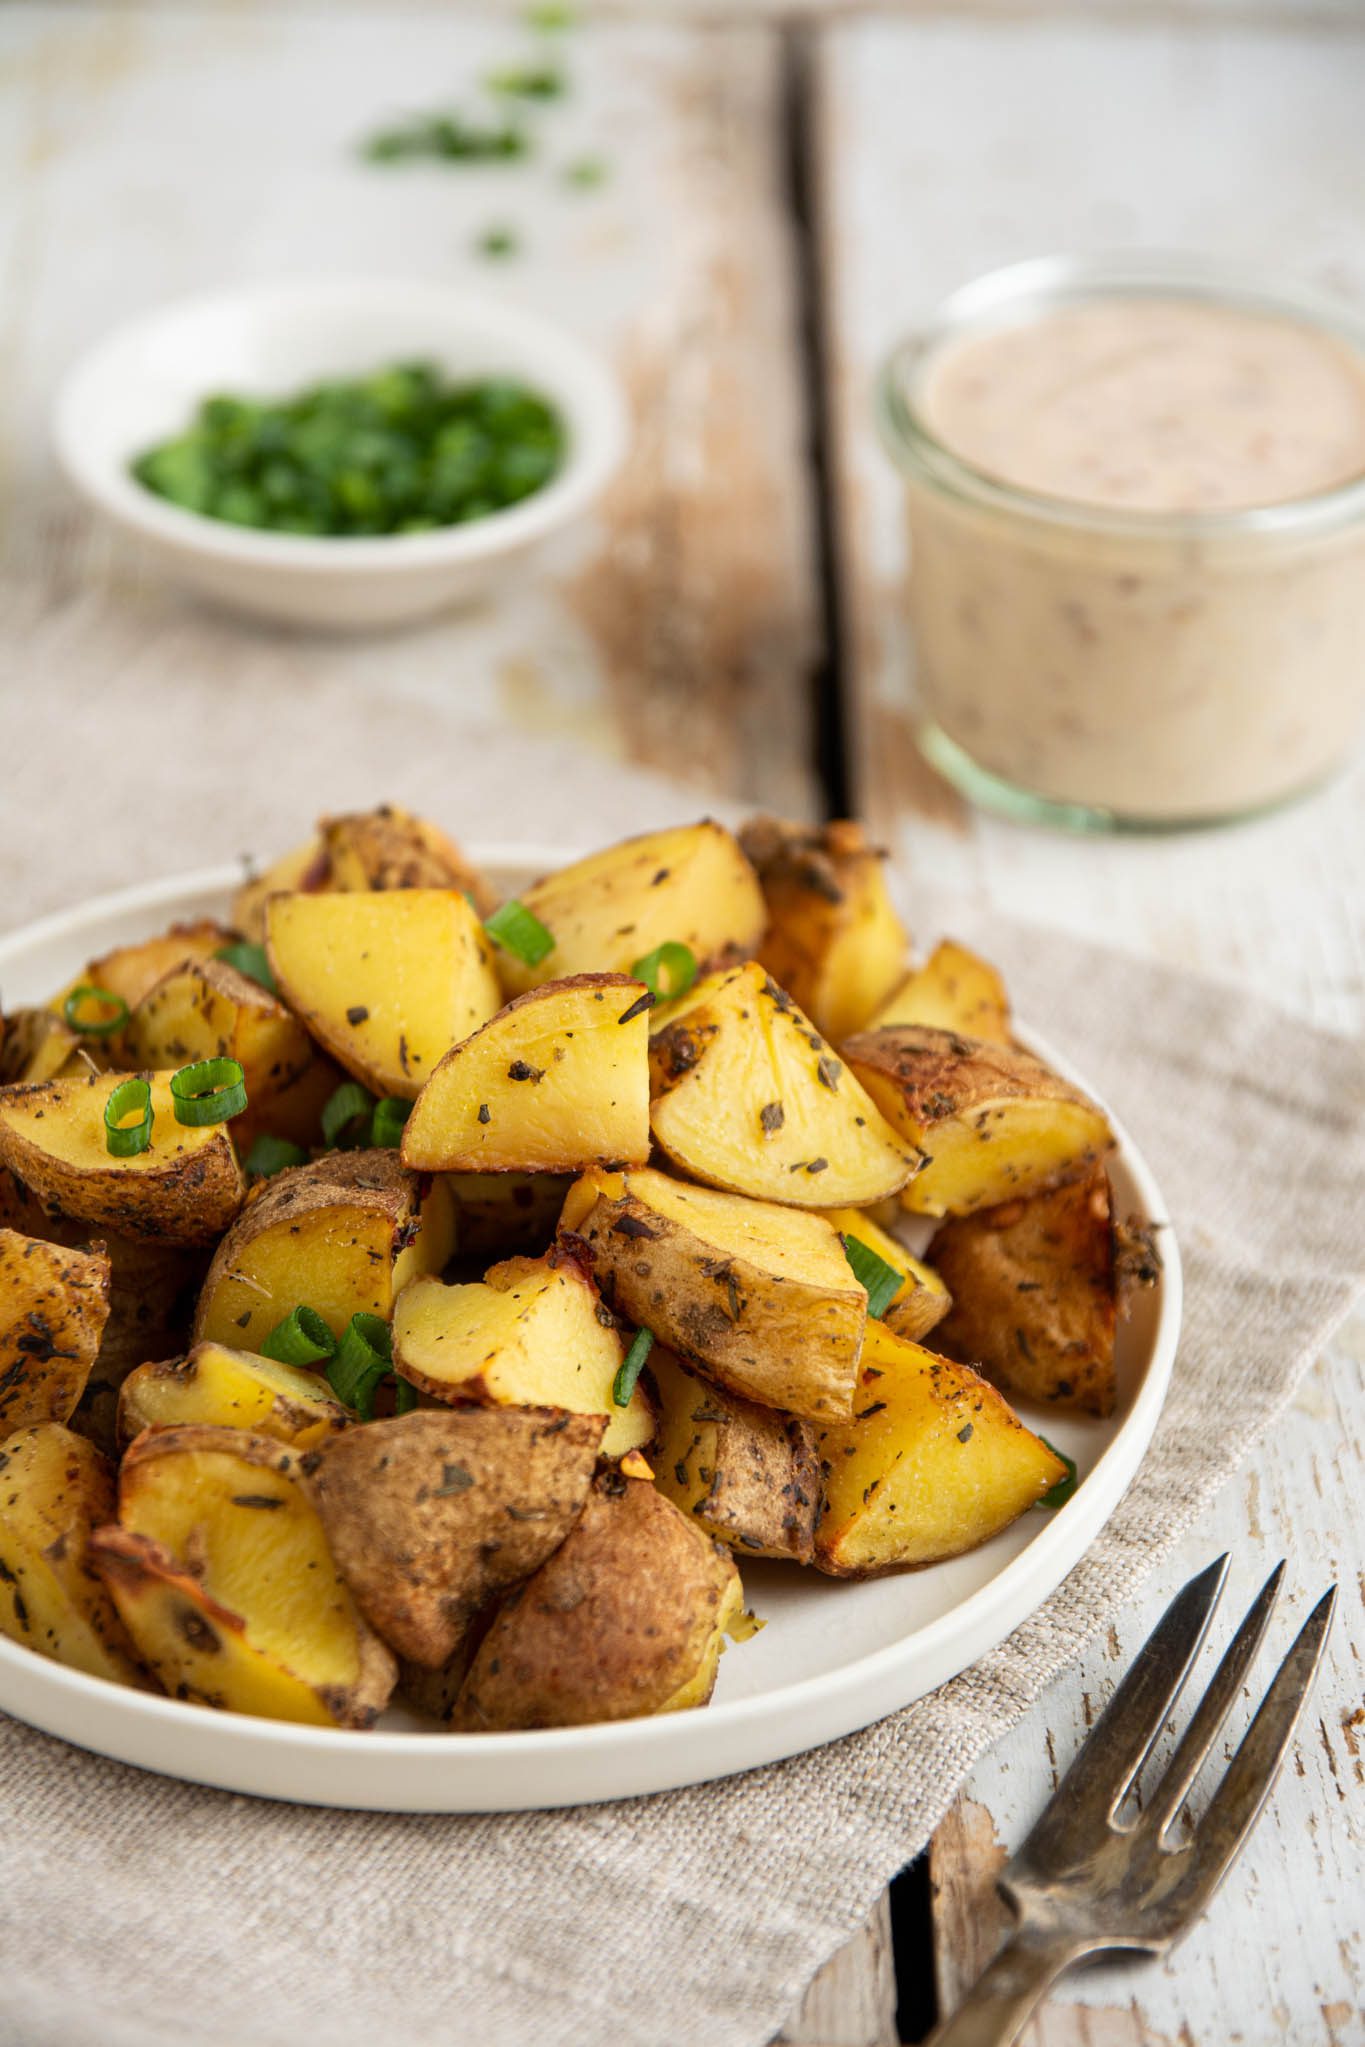 Learn how to make an herby baked potato recipe in the oven without oil or butter. Those baked potatoes are easy to make and pair perfectly with homemade mustardy yogurt dipping sauce.